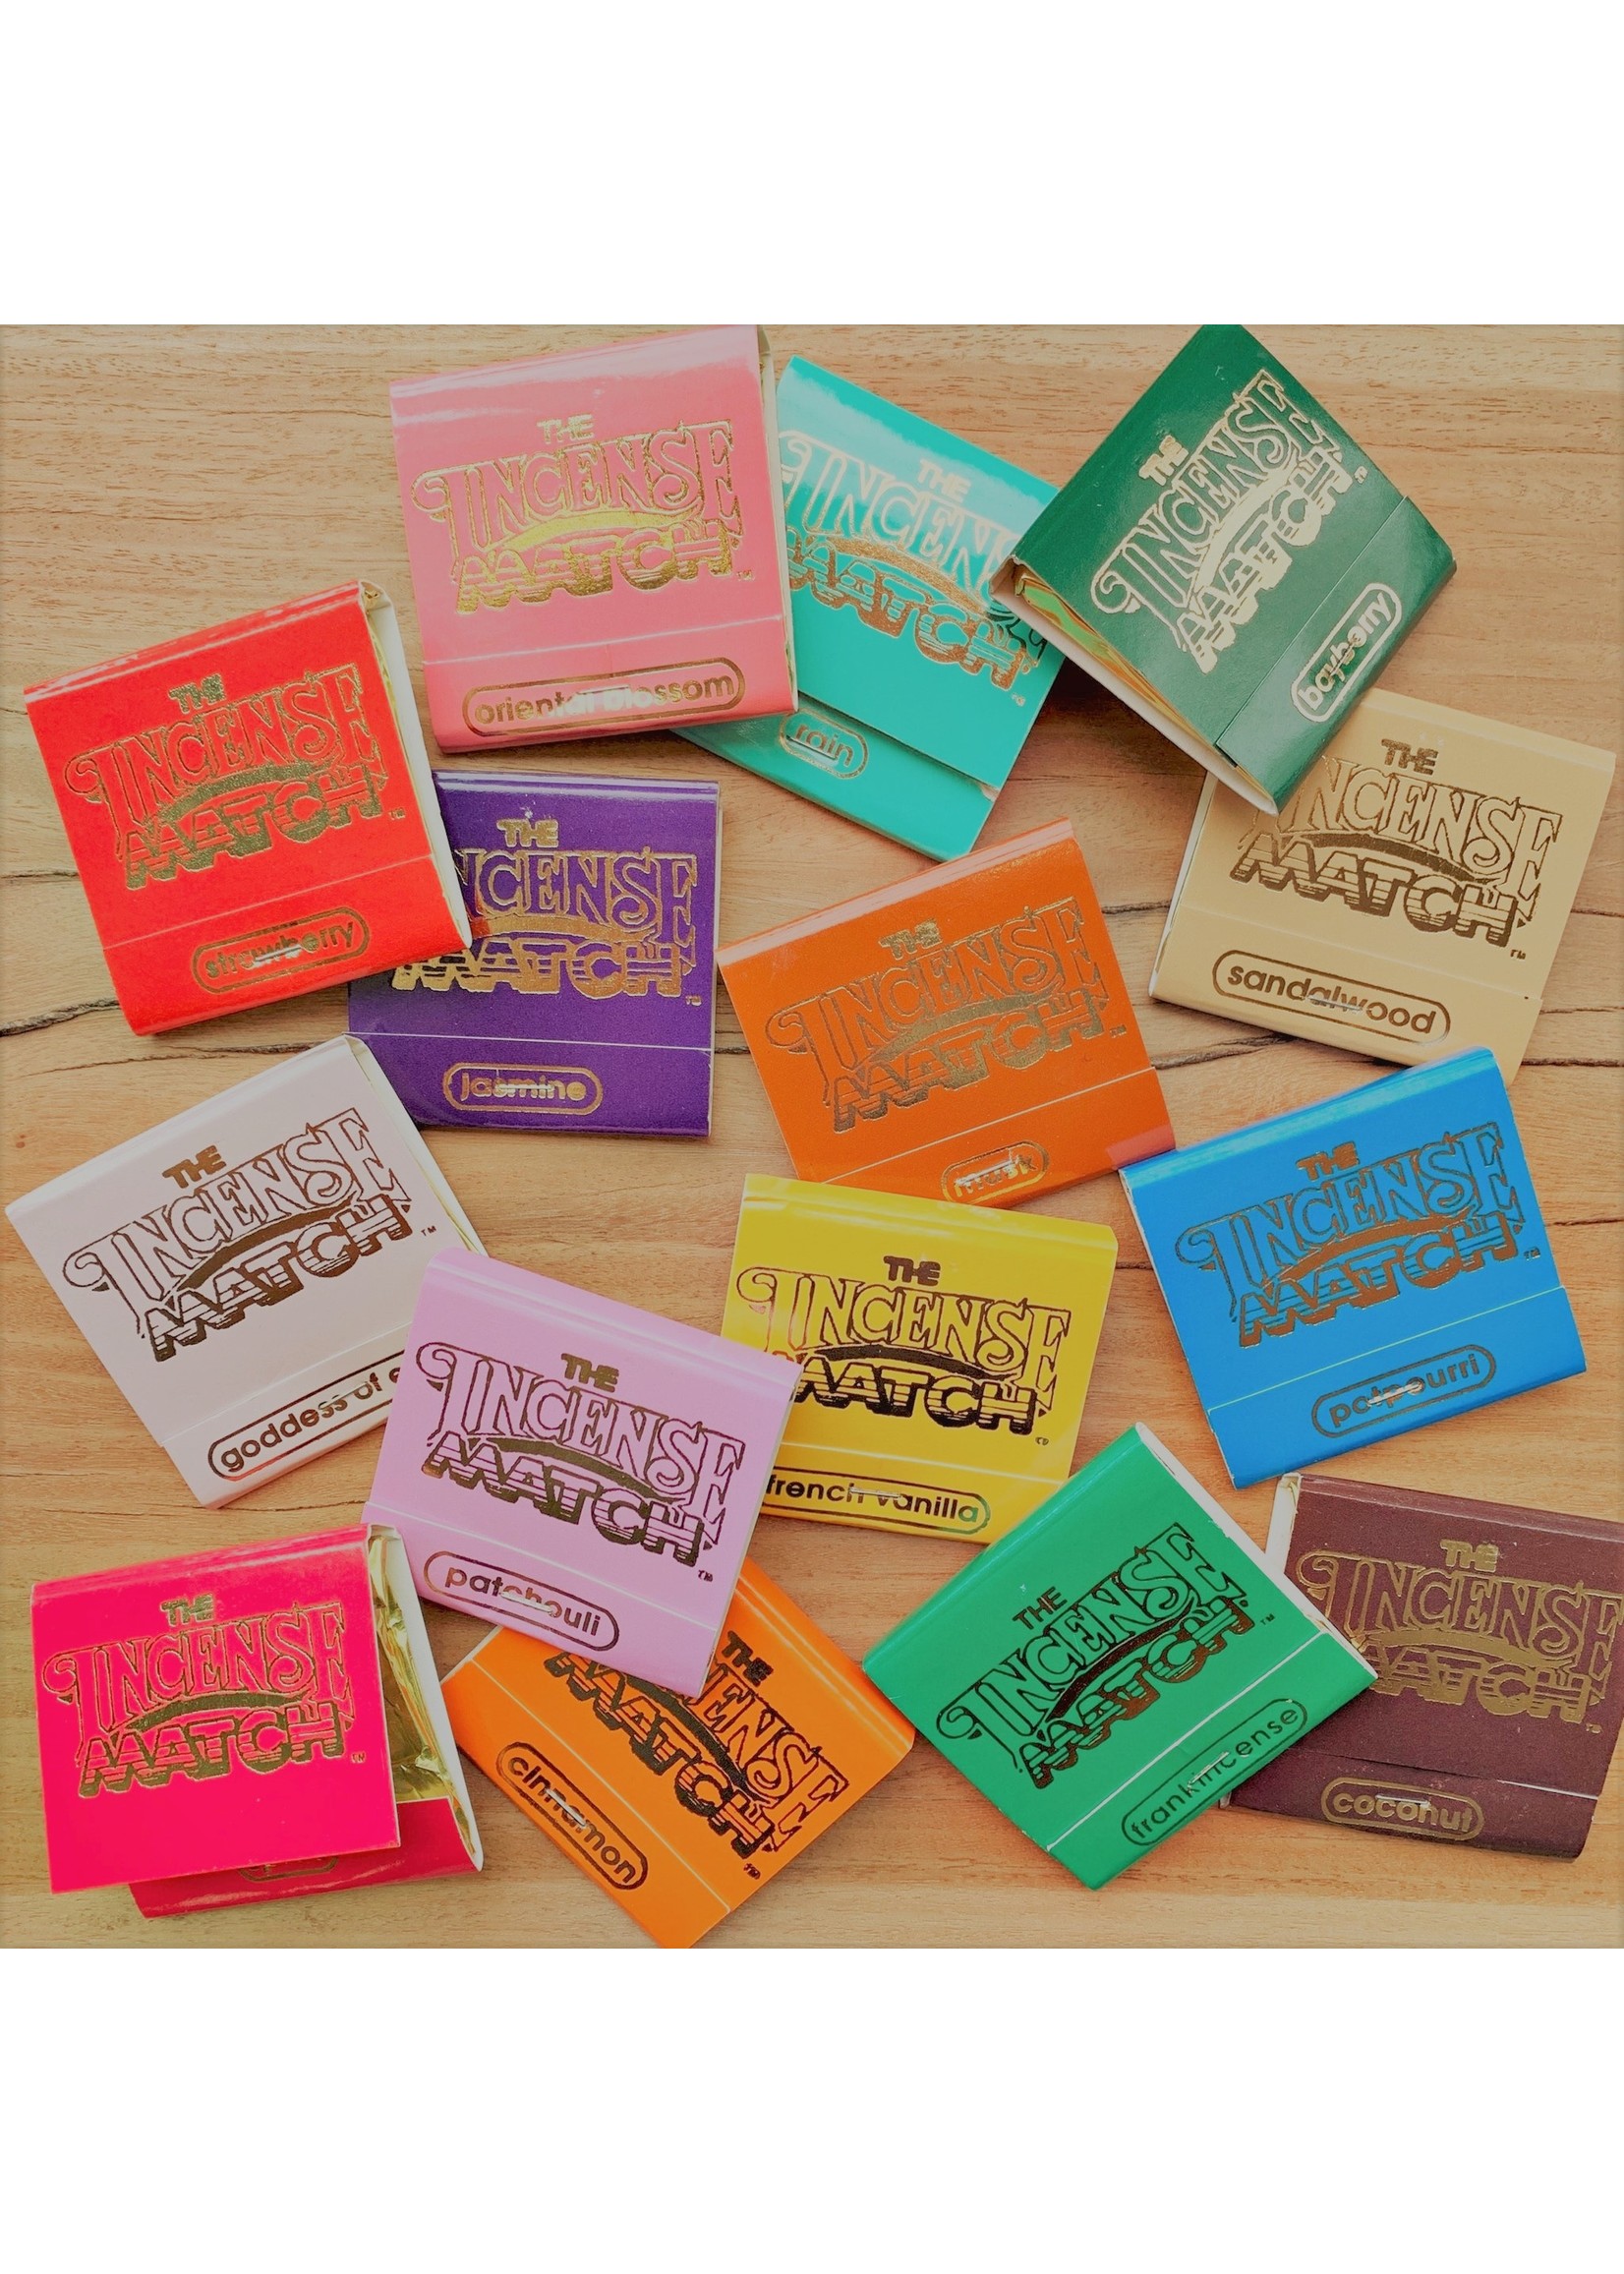 package incense matches, portable air freshener